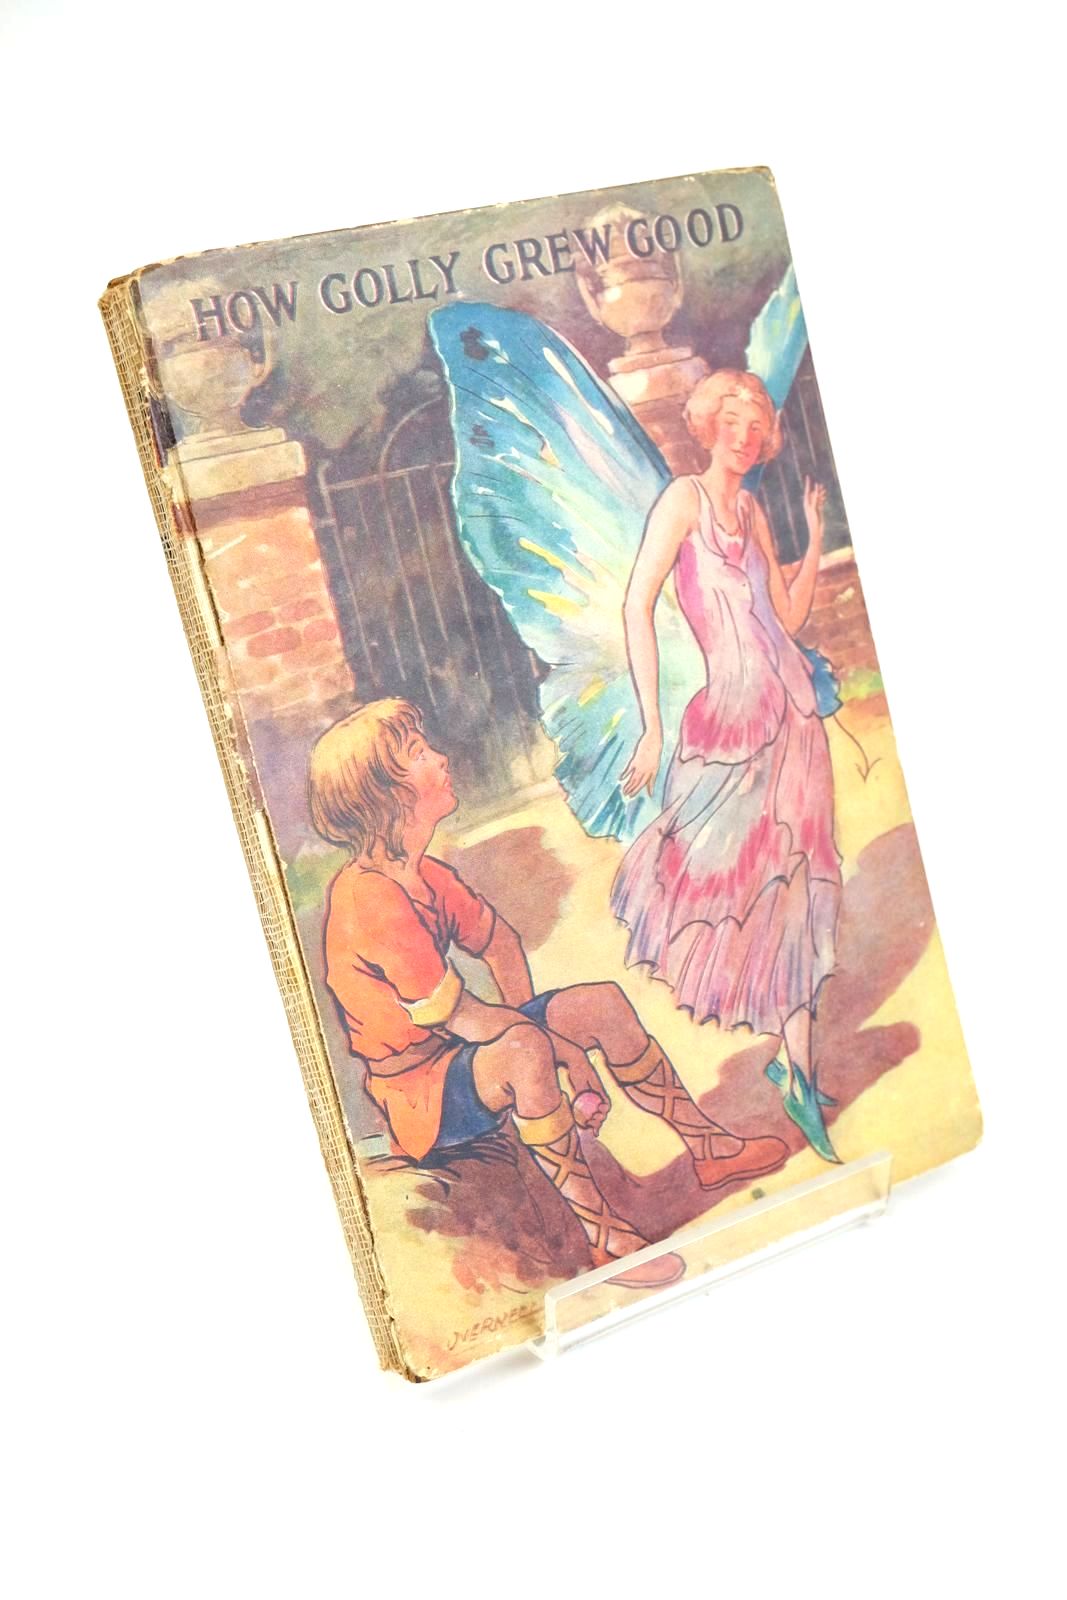 Photo of HOW GOLLY GREW GOOD written by Talbot, Ethel illustrated by Robinson, H.K.A. published by Lutterworth Press (STOCK CODE: 1328080)  for sale by Stella & Rose's Books